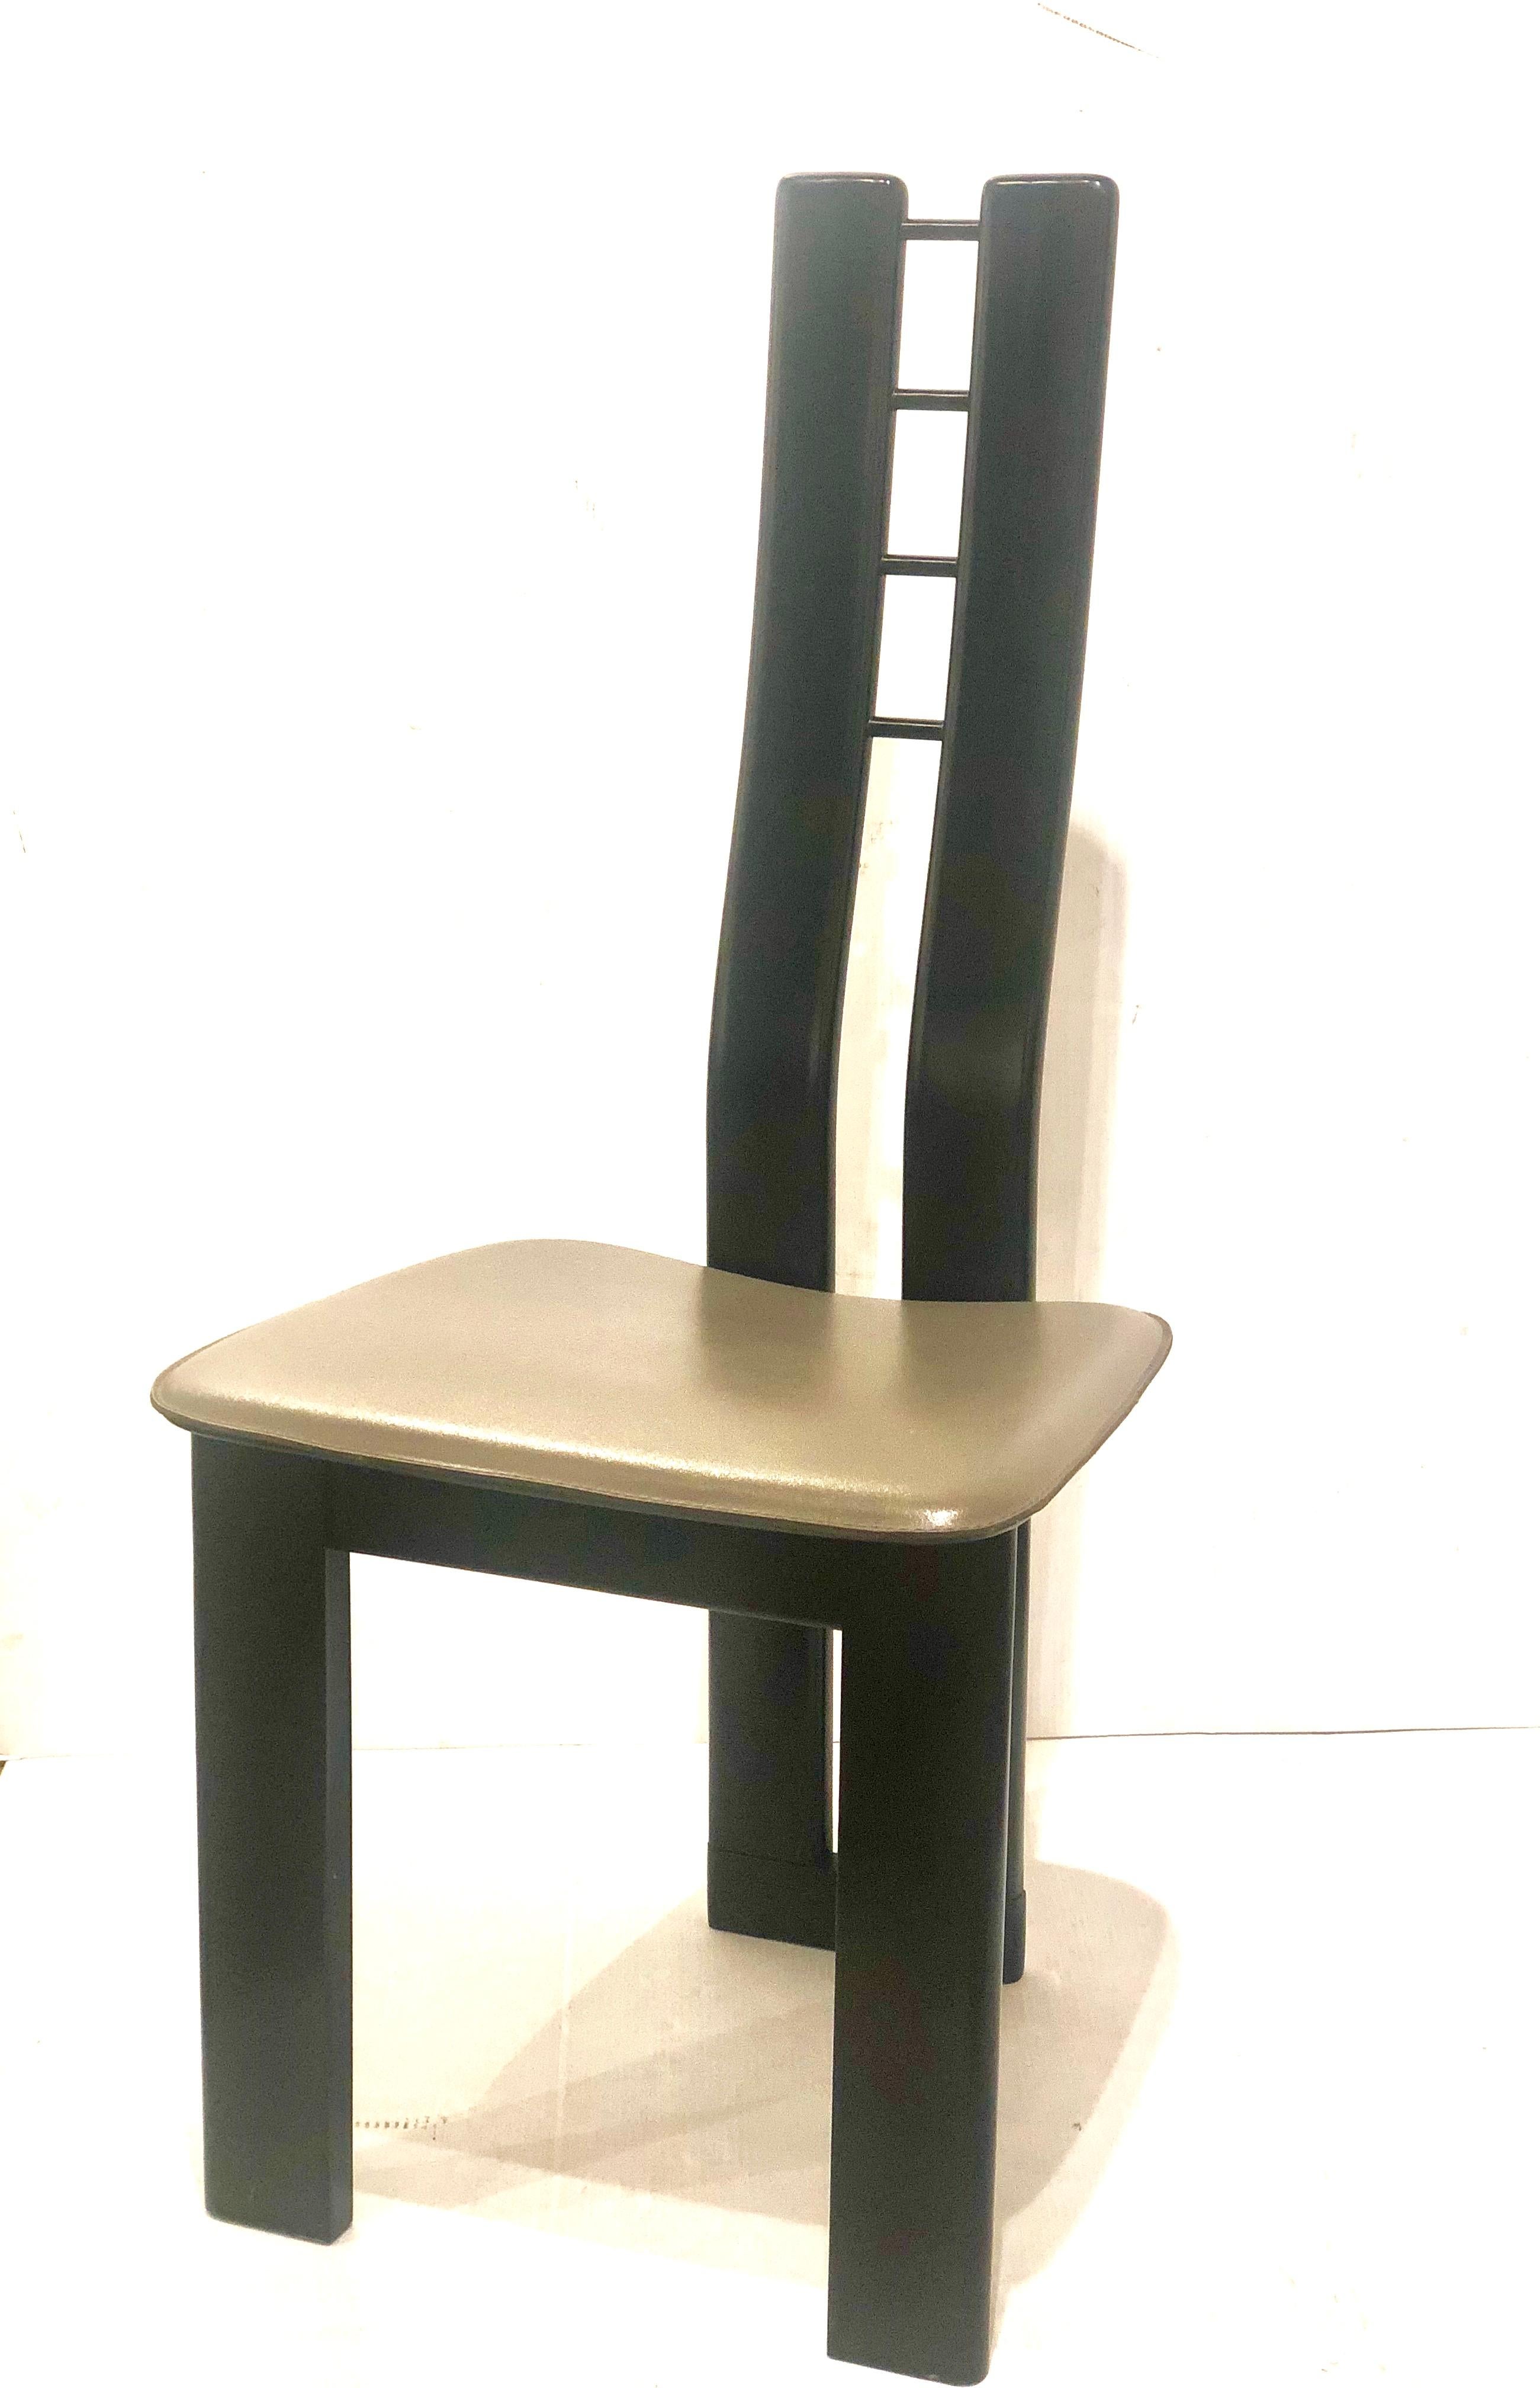 Beautiful and elegant design, on this unique tall back side chair in leather seat with ebonized wood frame in satin finish, circa 1980s. A Klassik Memphis era design solid and sturdy great sculptural accent chair.